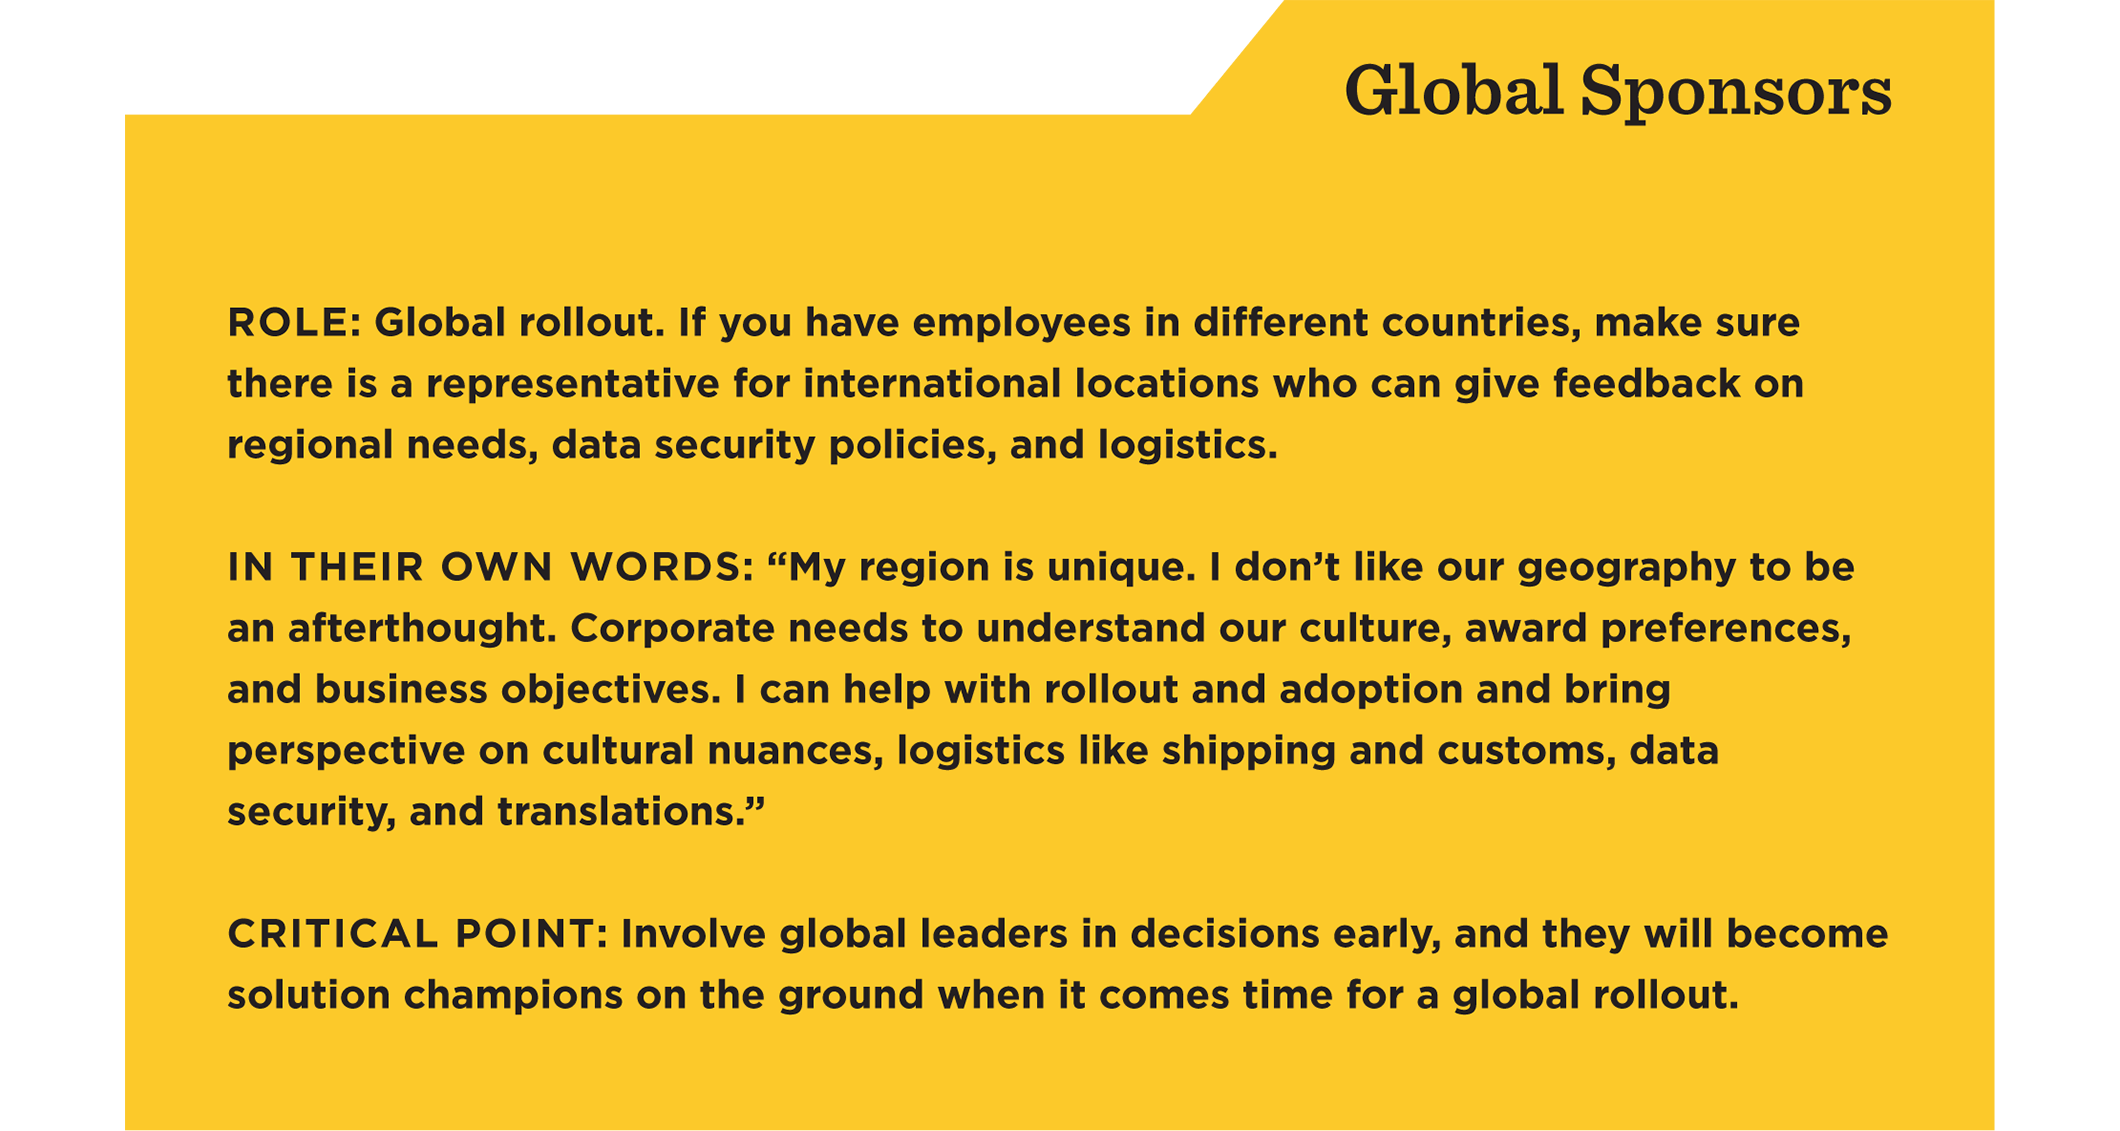 Involve global leaders in decisions early, and they will become solution champions on the ground when it comes time for a global rollout.